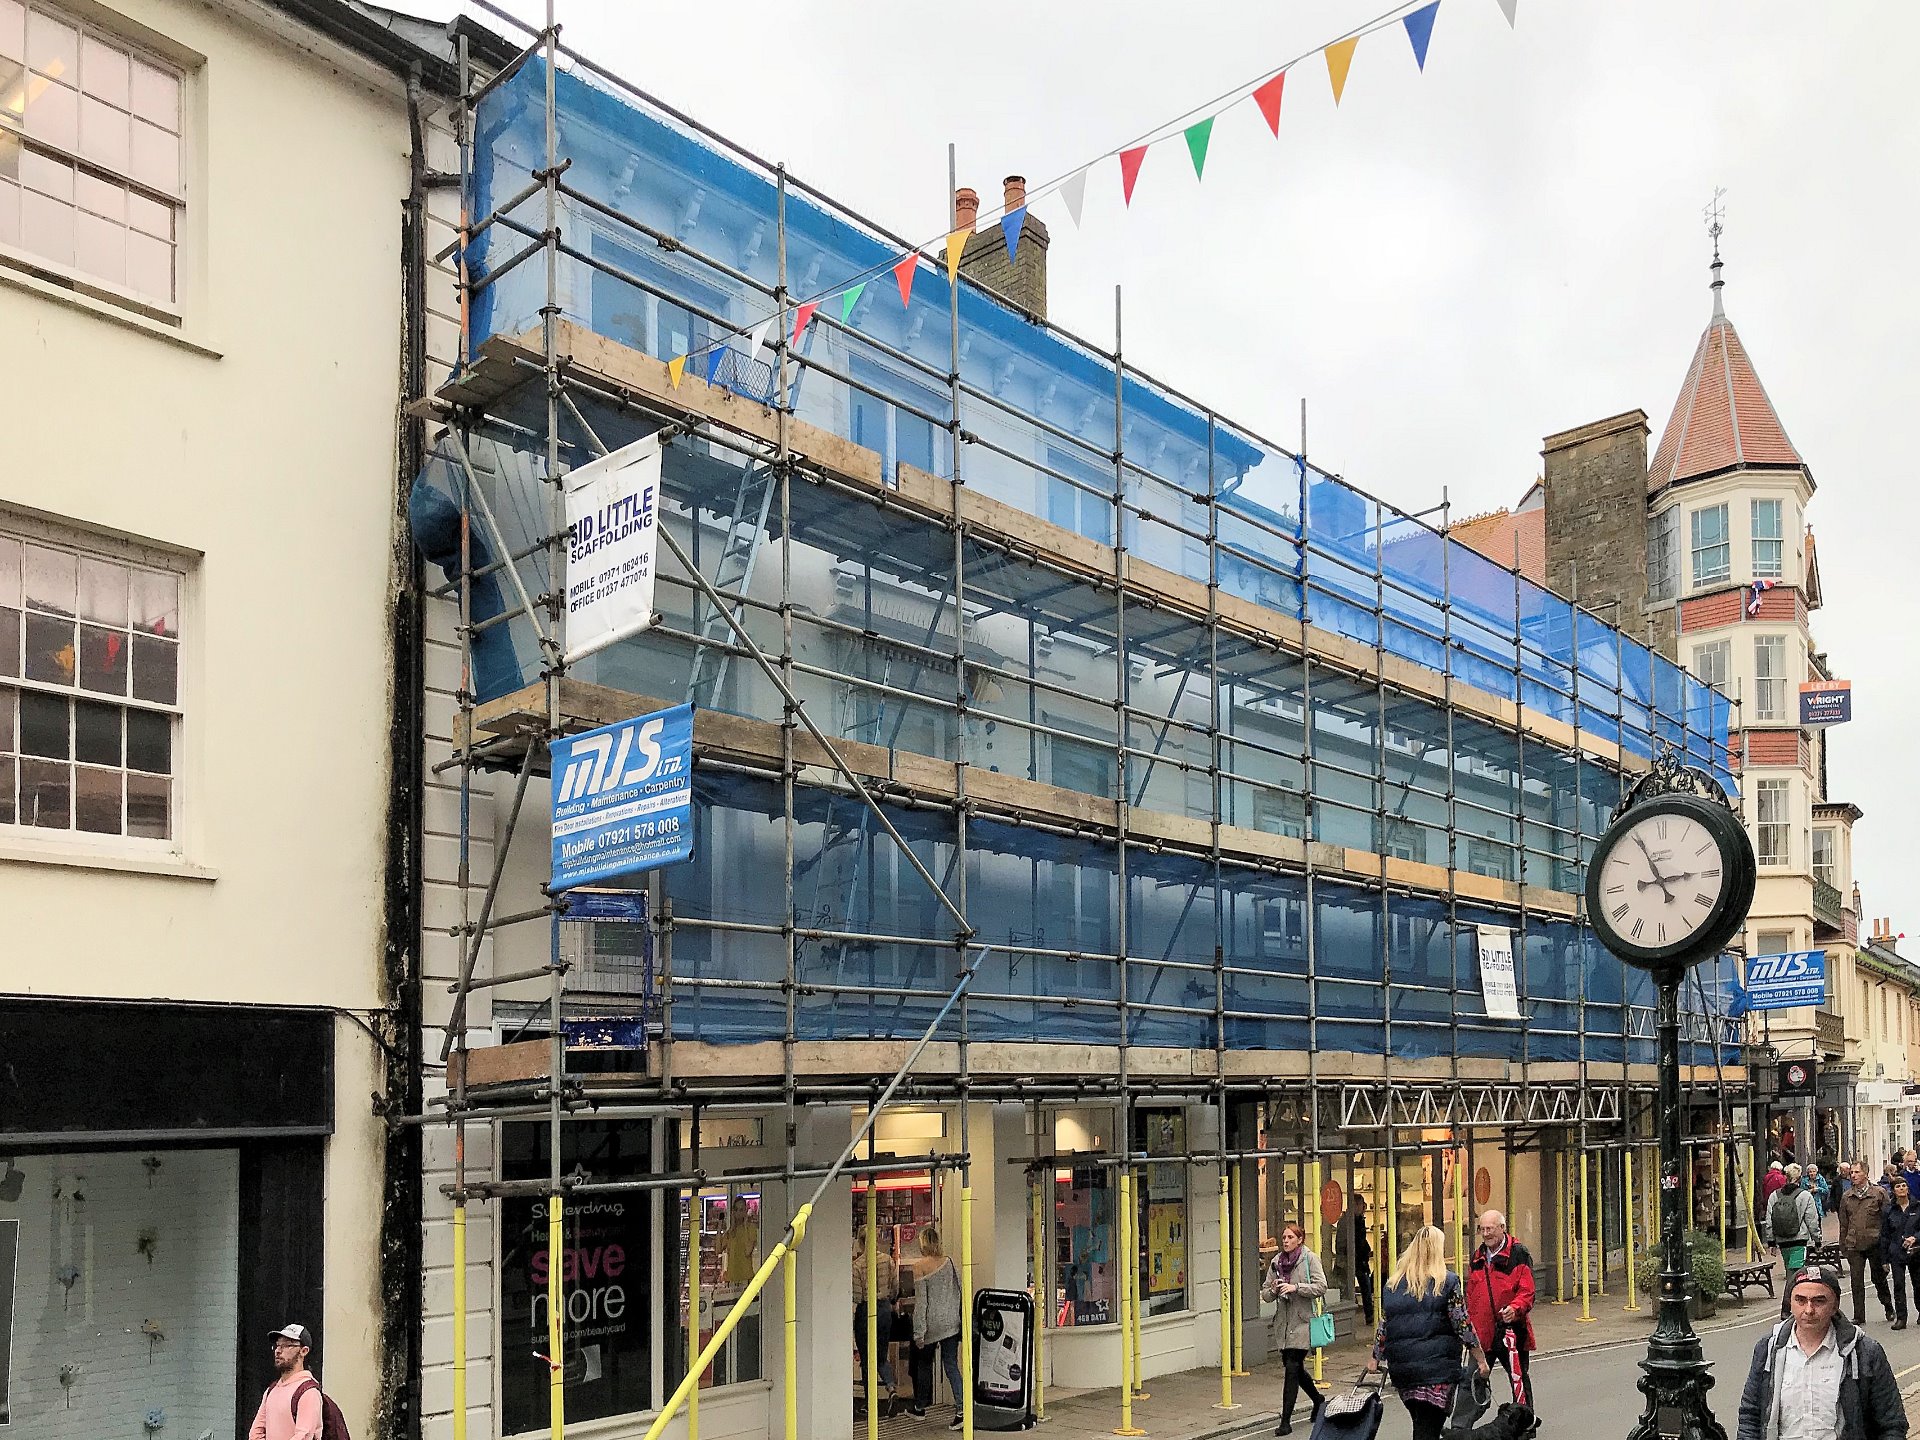 Barnstaple High Street redecoration work starts after the September 2018 Carnival and Fair